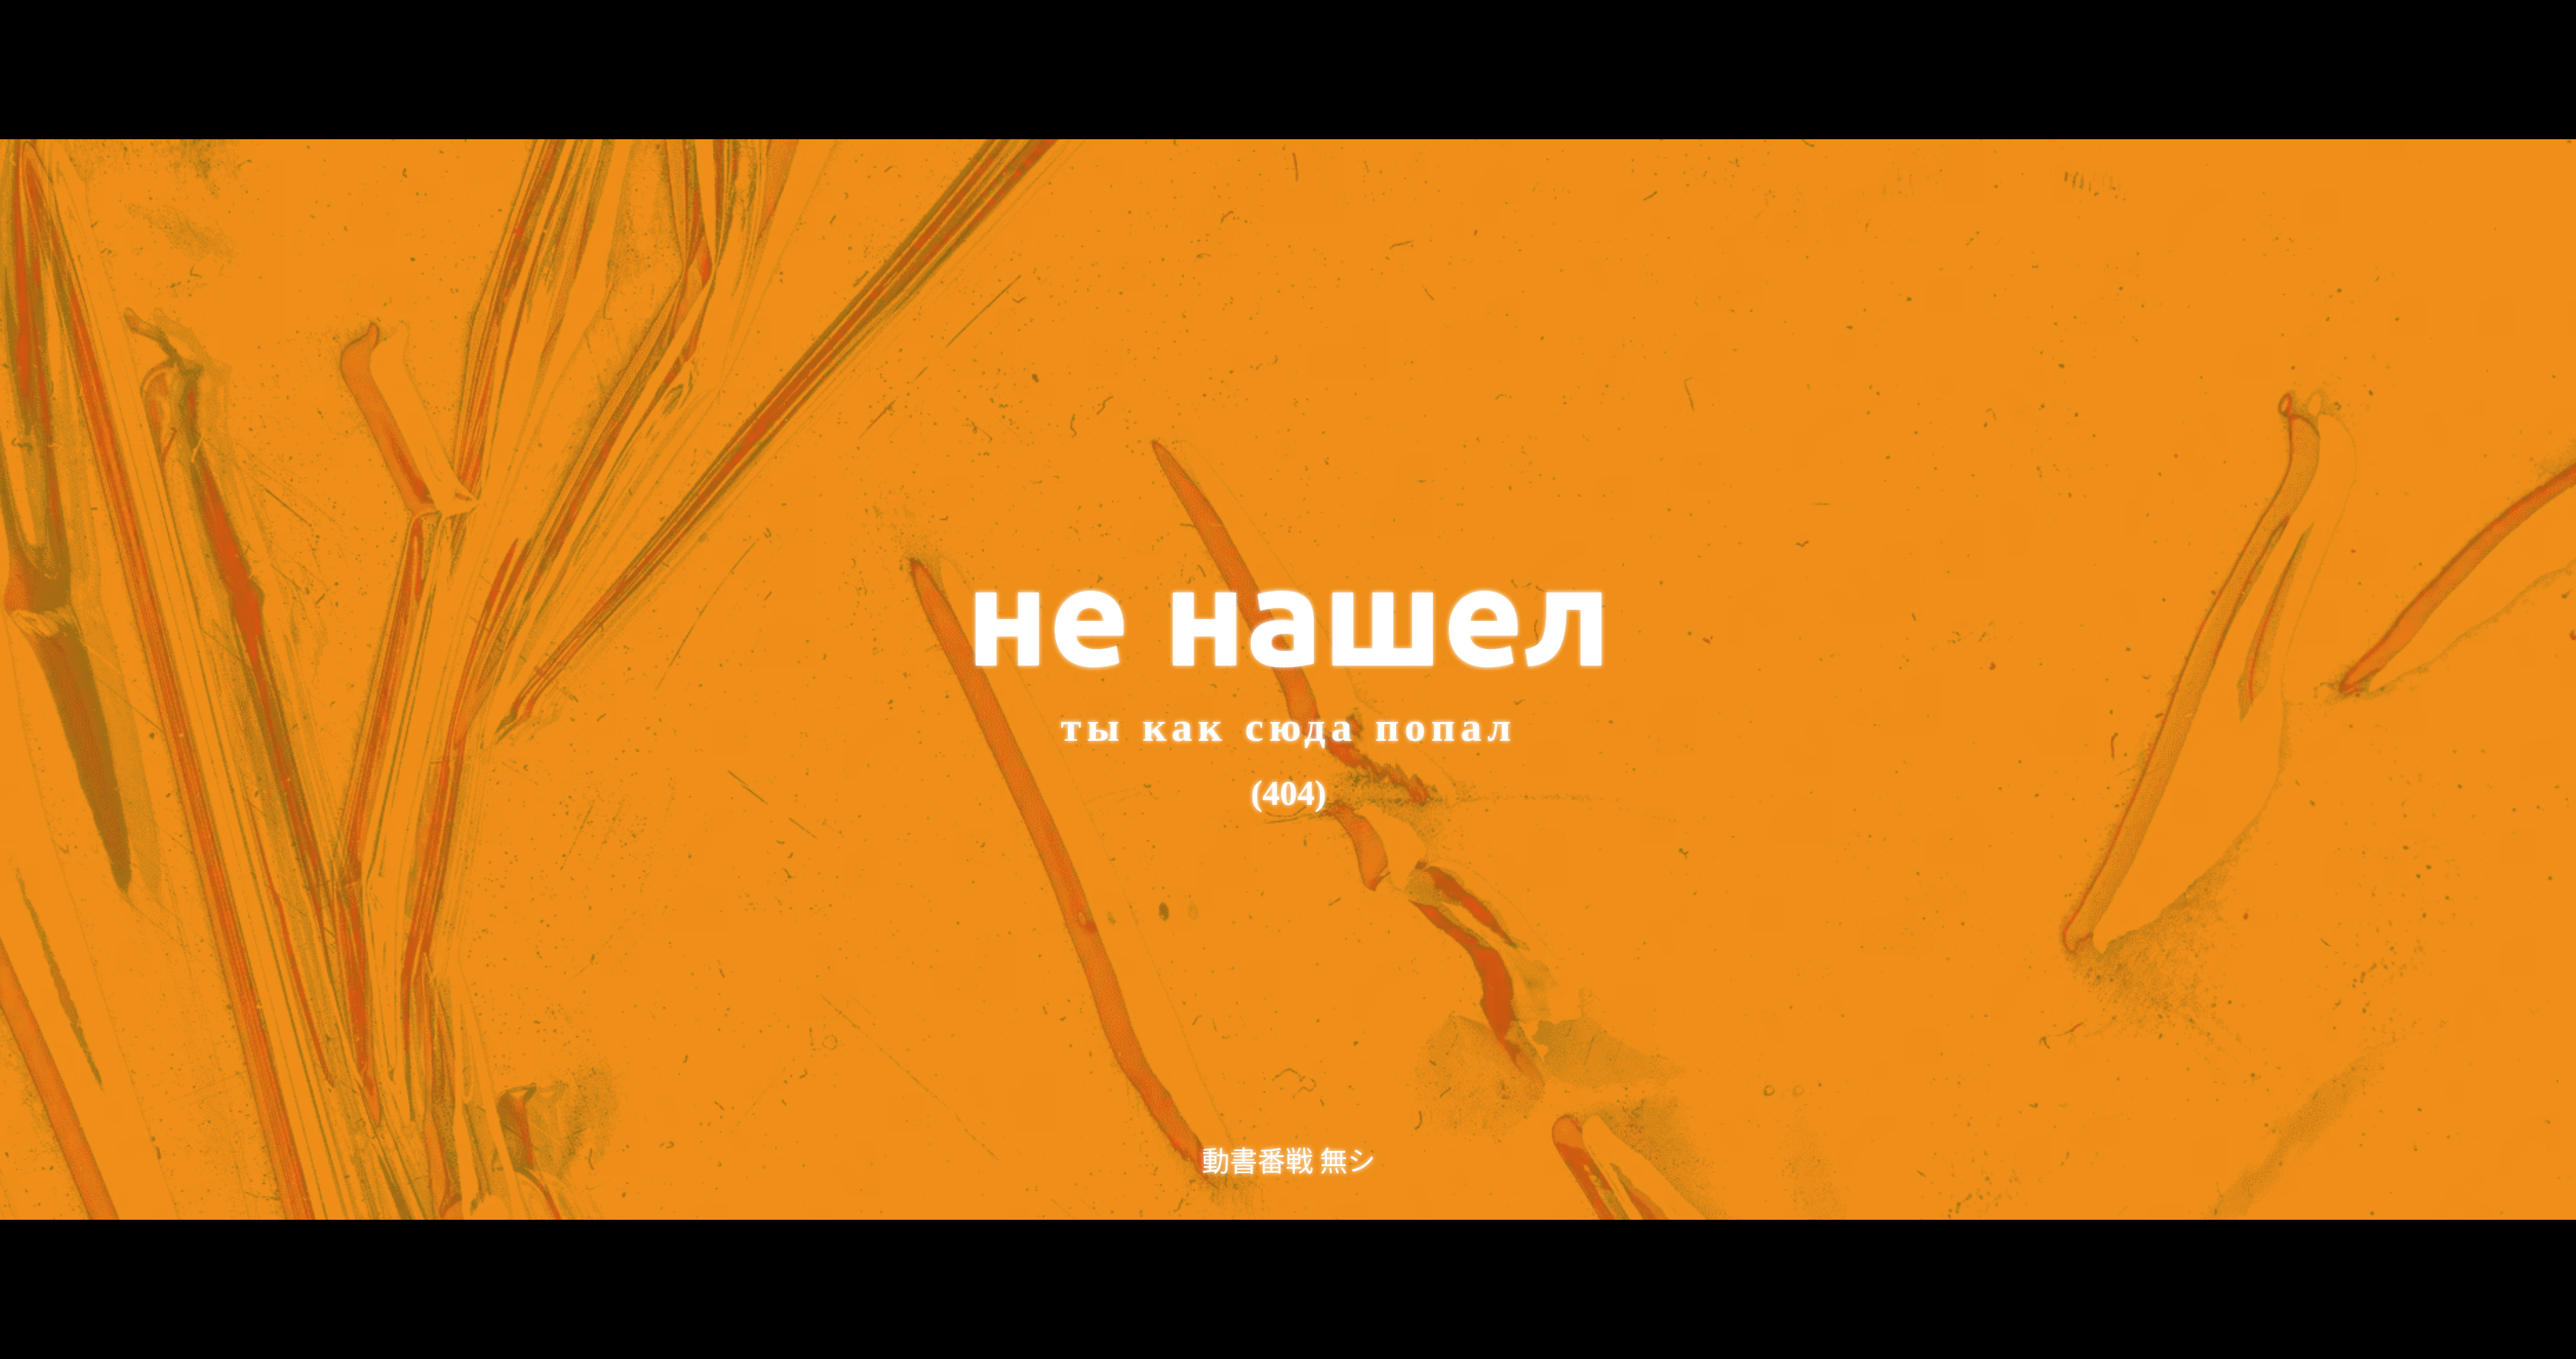 General 3700x1952 Russian graphic design text bright yellow 404 Not Found white text digital art